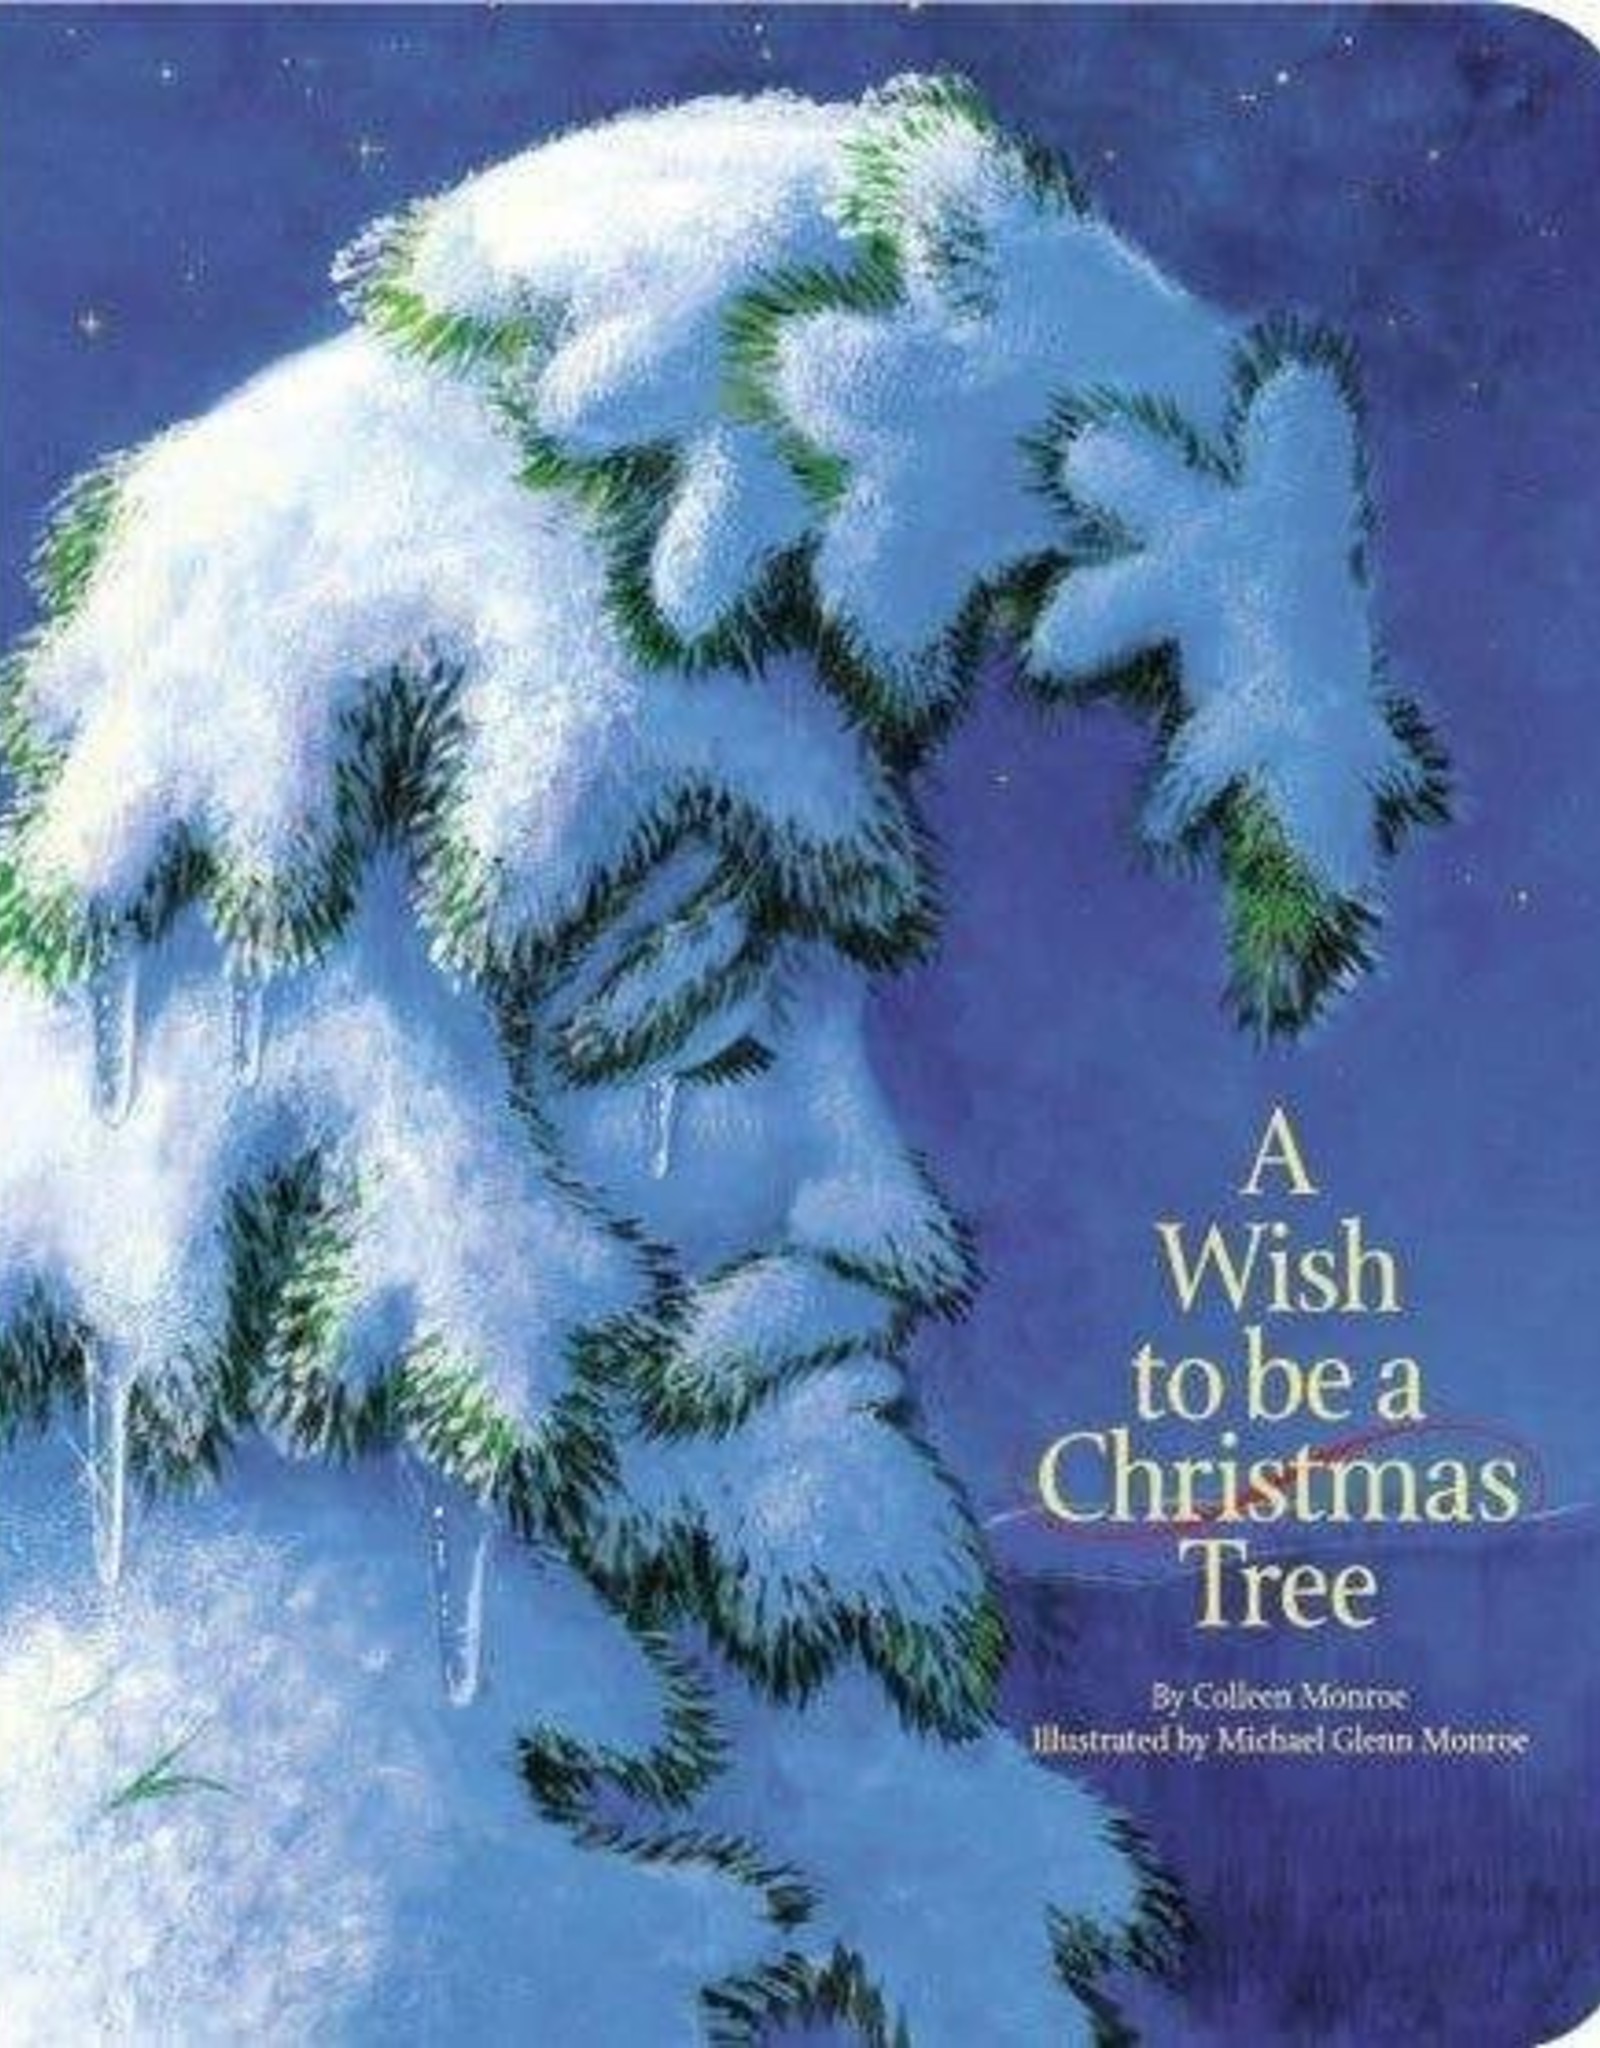 "A Wish to be A Christmas Tree" Board Book